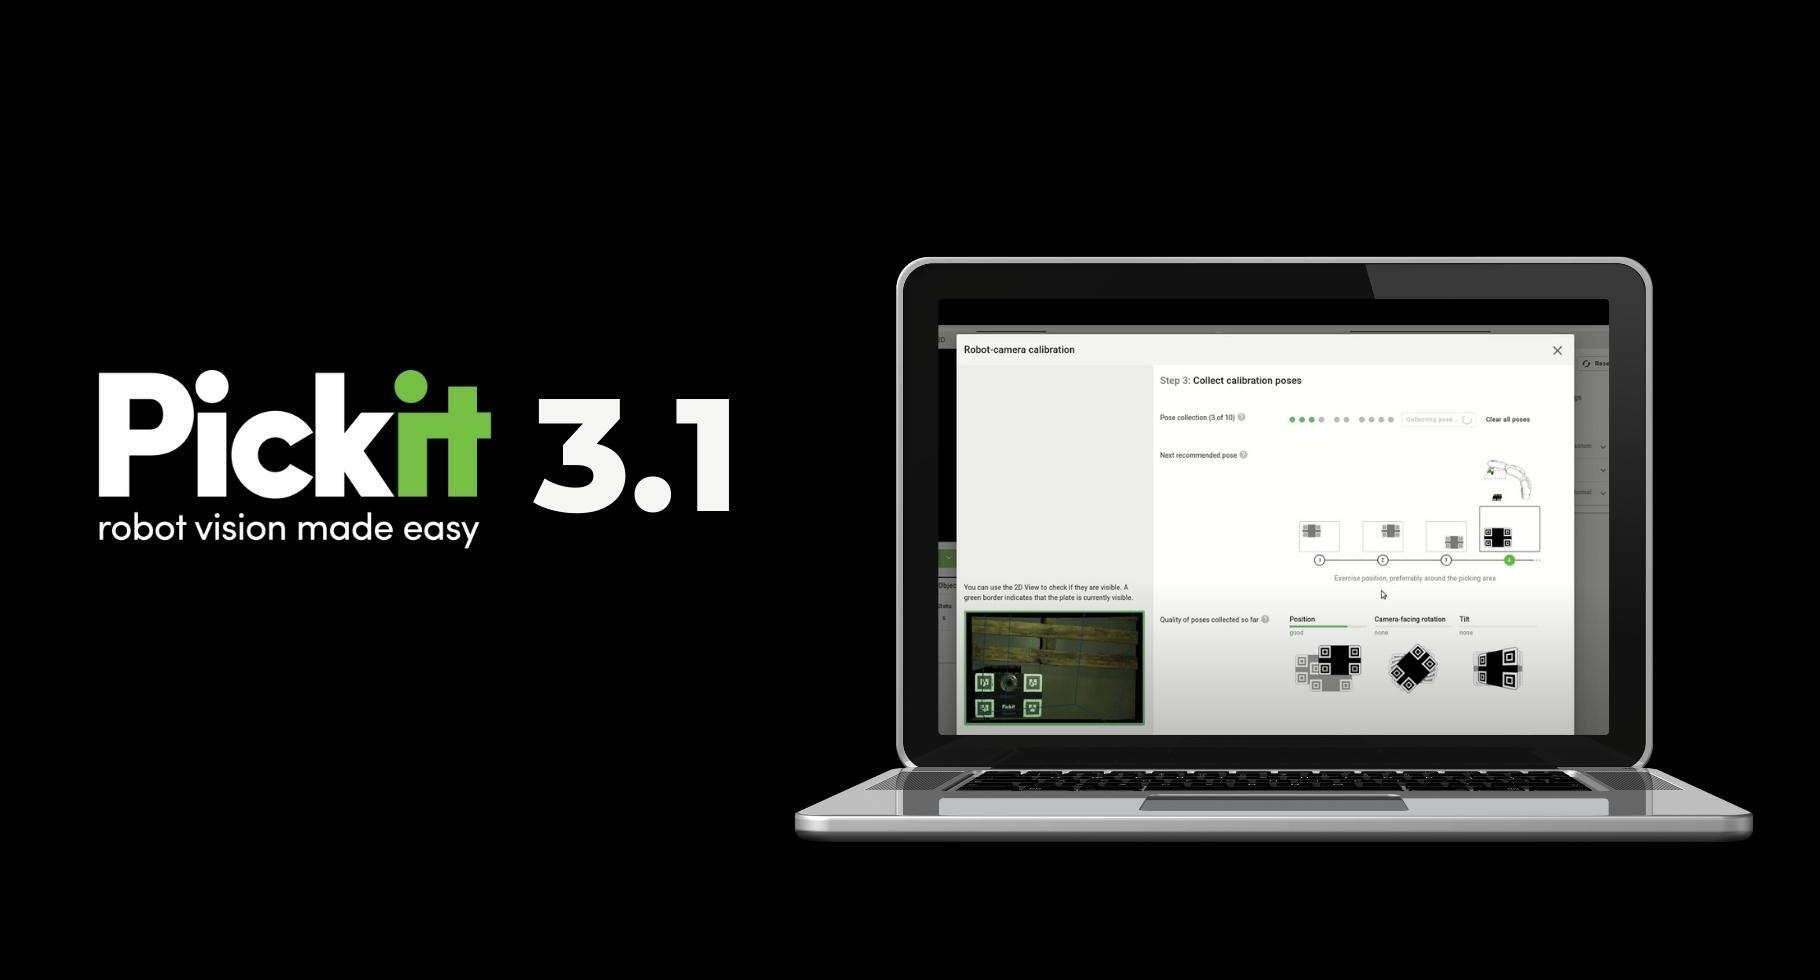 Welcome, Pickit 3.1: New and enhanced functionality focused on user-friendliness and your productivity.